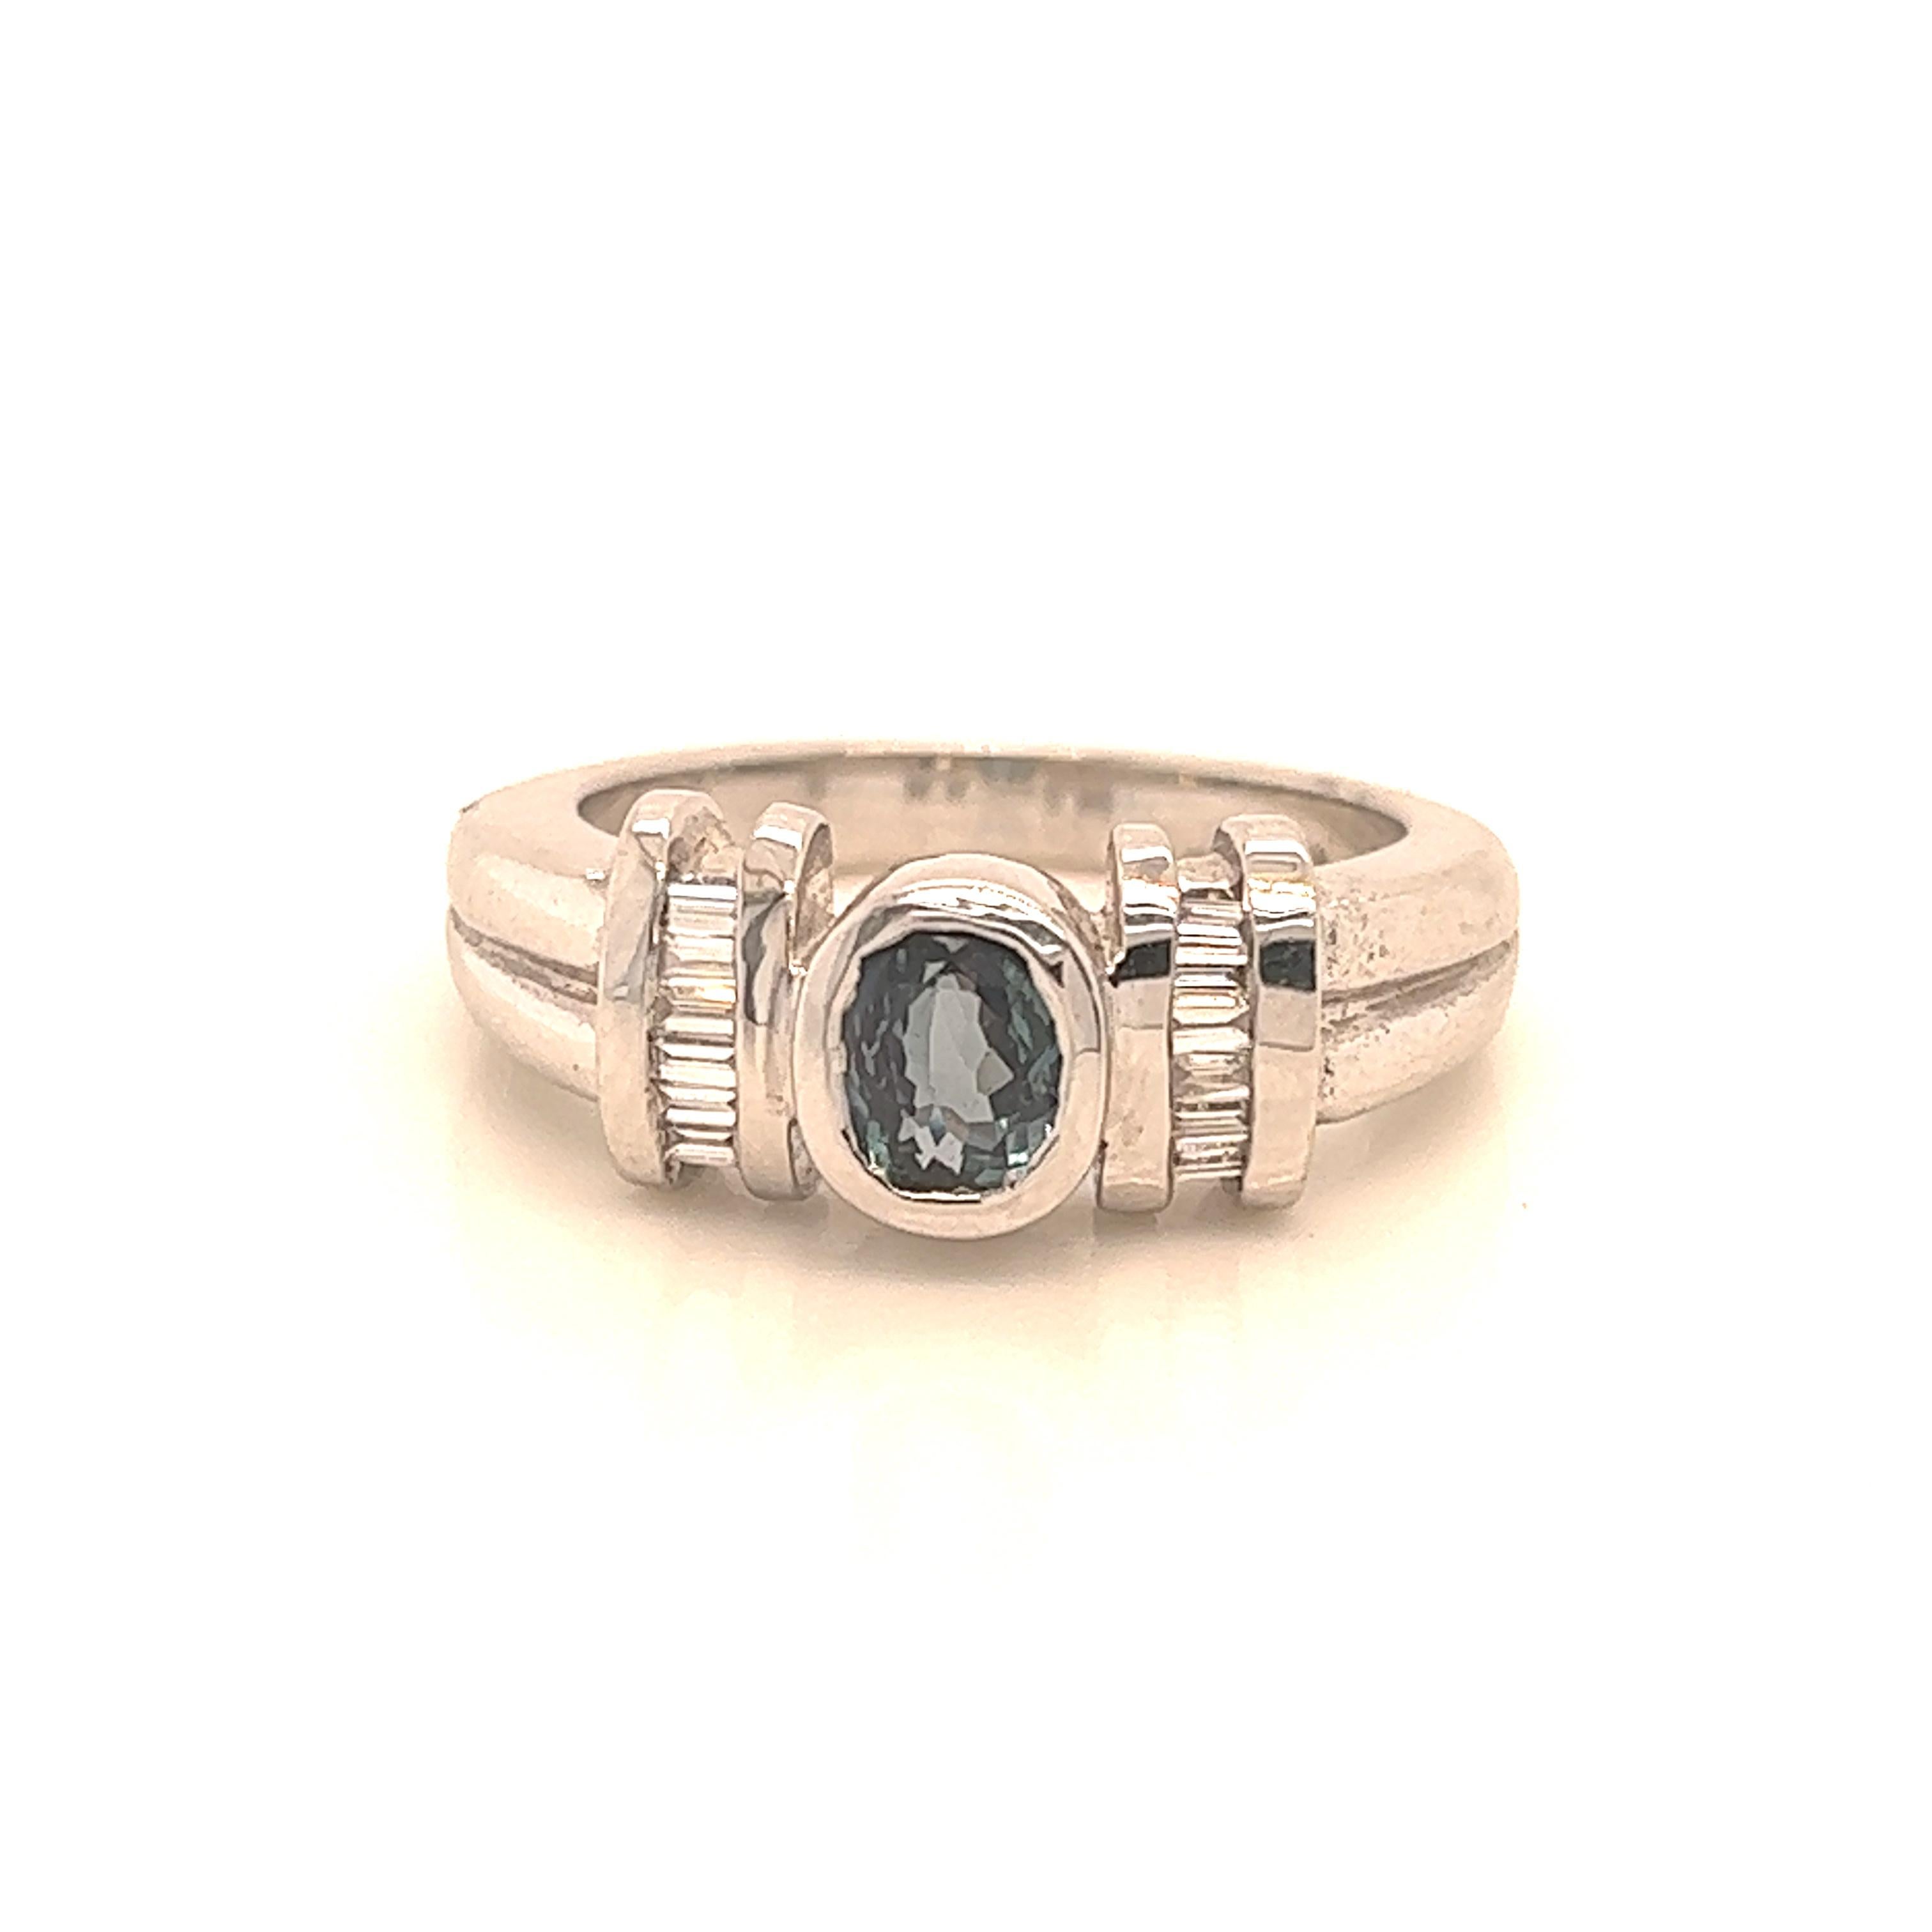 This is a gorgeous natural AAA quality oval Alexandrite surrounded by dainty diamonds that is set in a vintage White Gold setting. This ring features a natural 0.87 carat oval alexandrite that is certified by the Gemological Institute of America